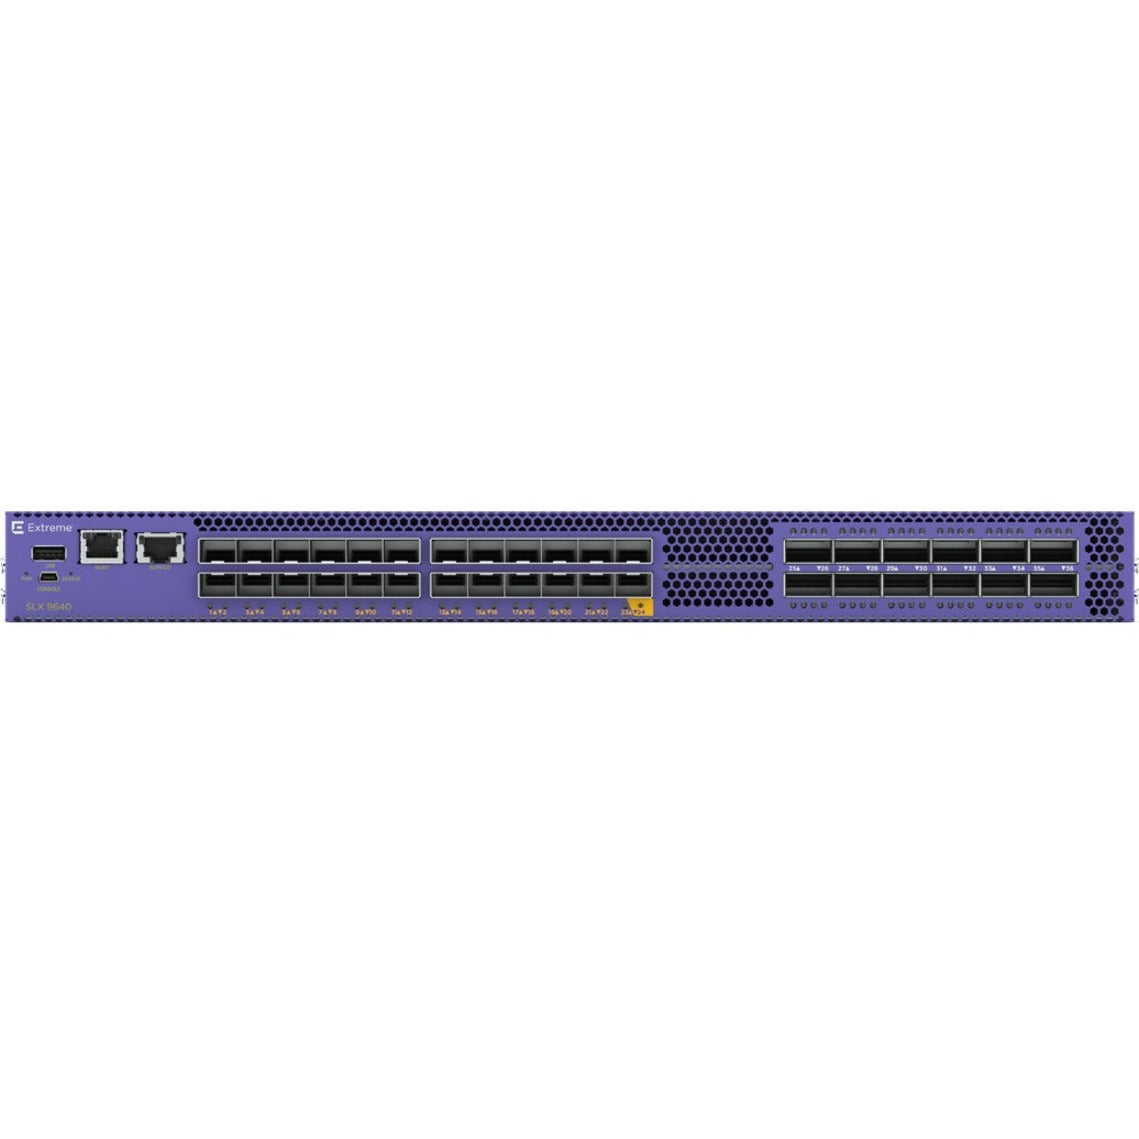 Extreme Networks ExtremeRouting SLX 9640 Router